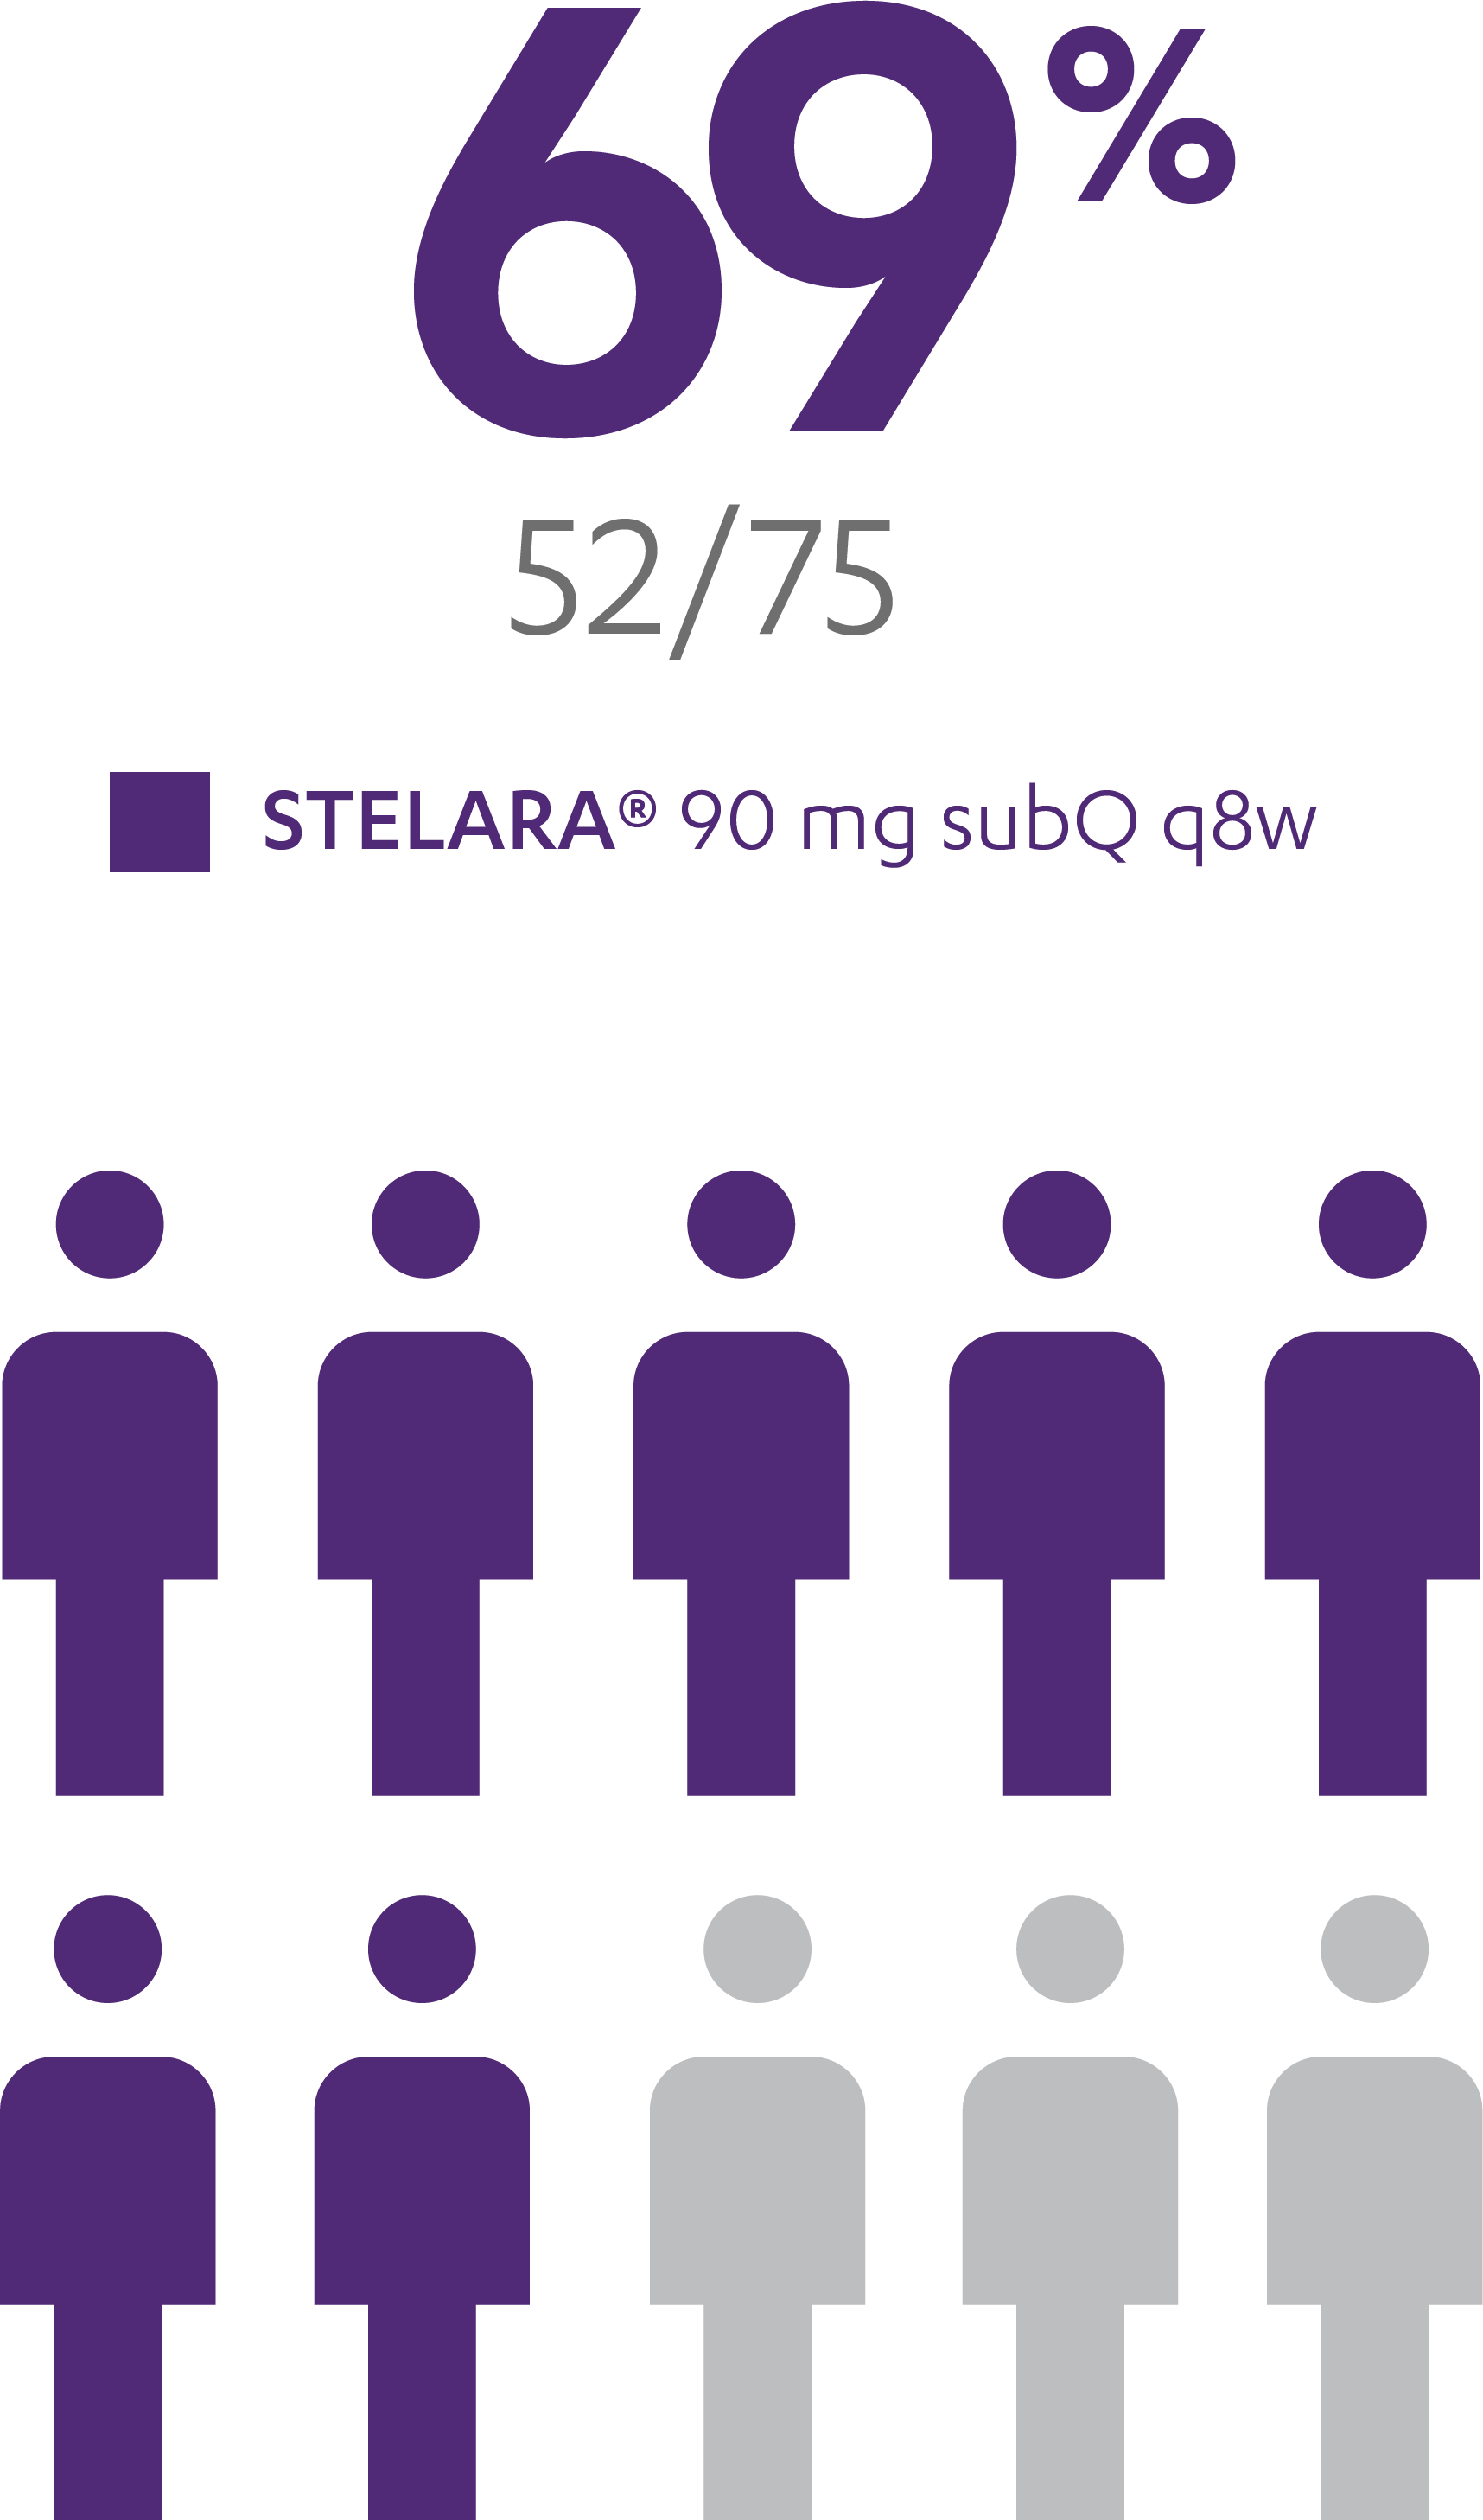 6 of 10 patients received STELARA® subcutaneous every 8 weeks and 69% of patients maintained symptomatic remission infographic